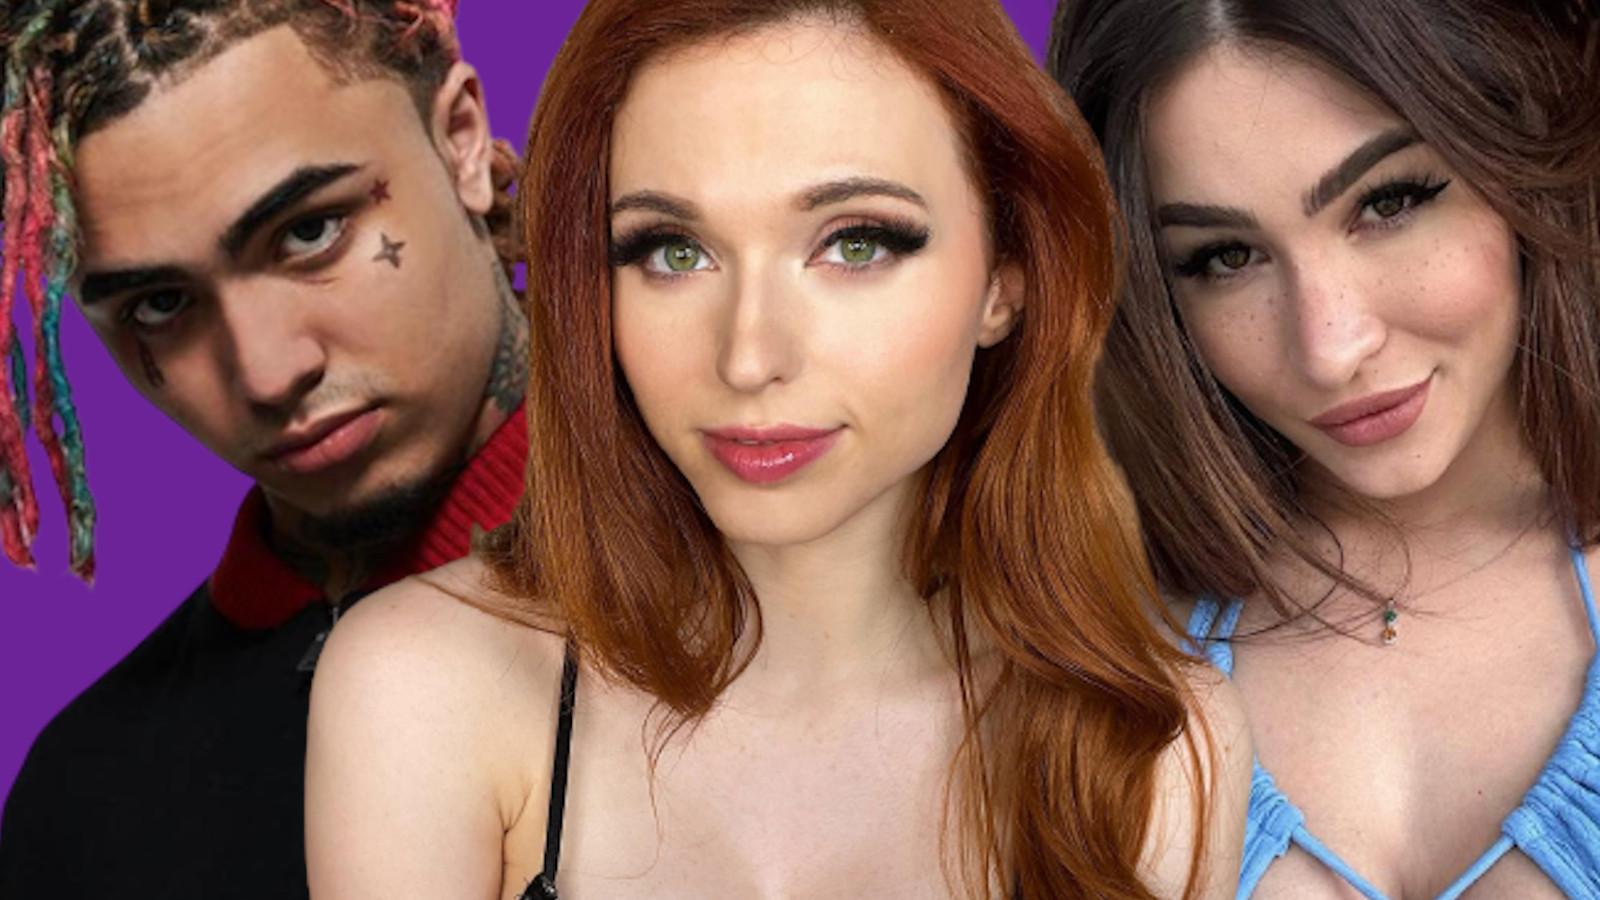 Lil pump with amouranth and fandy